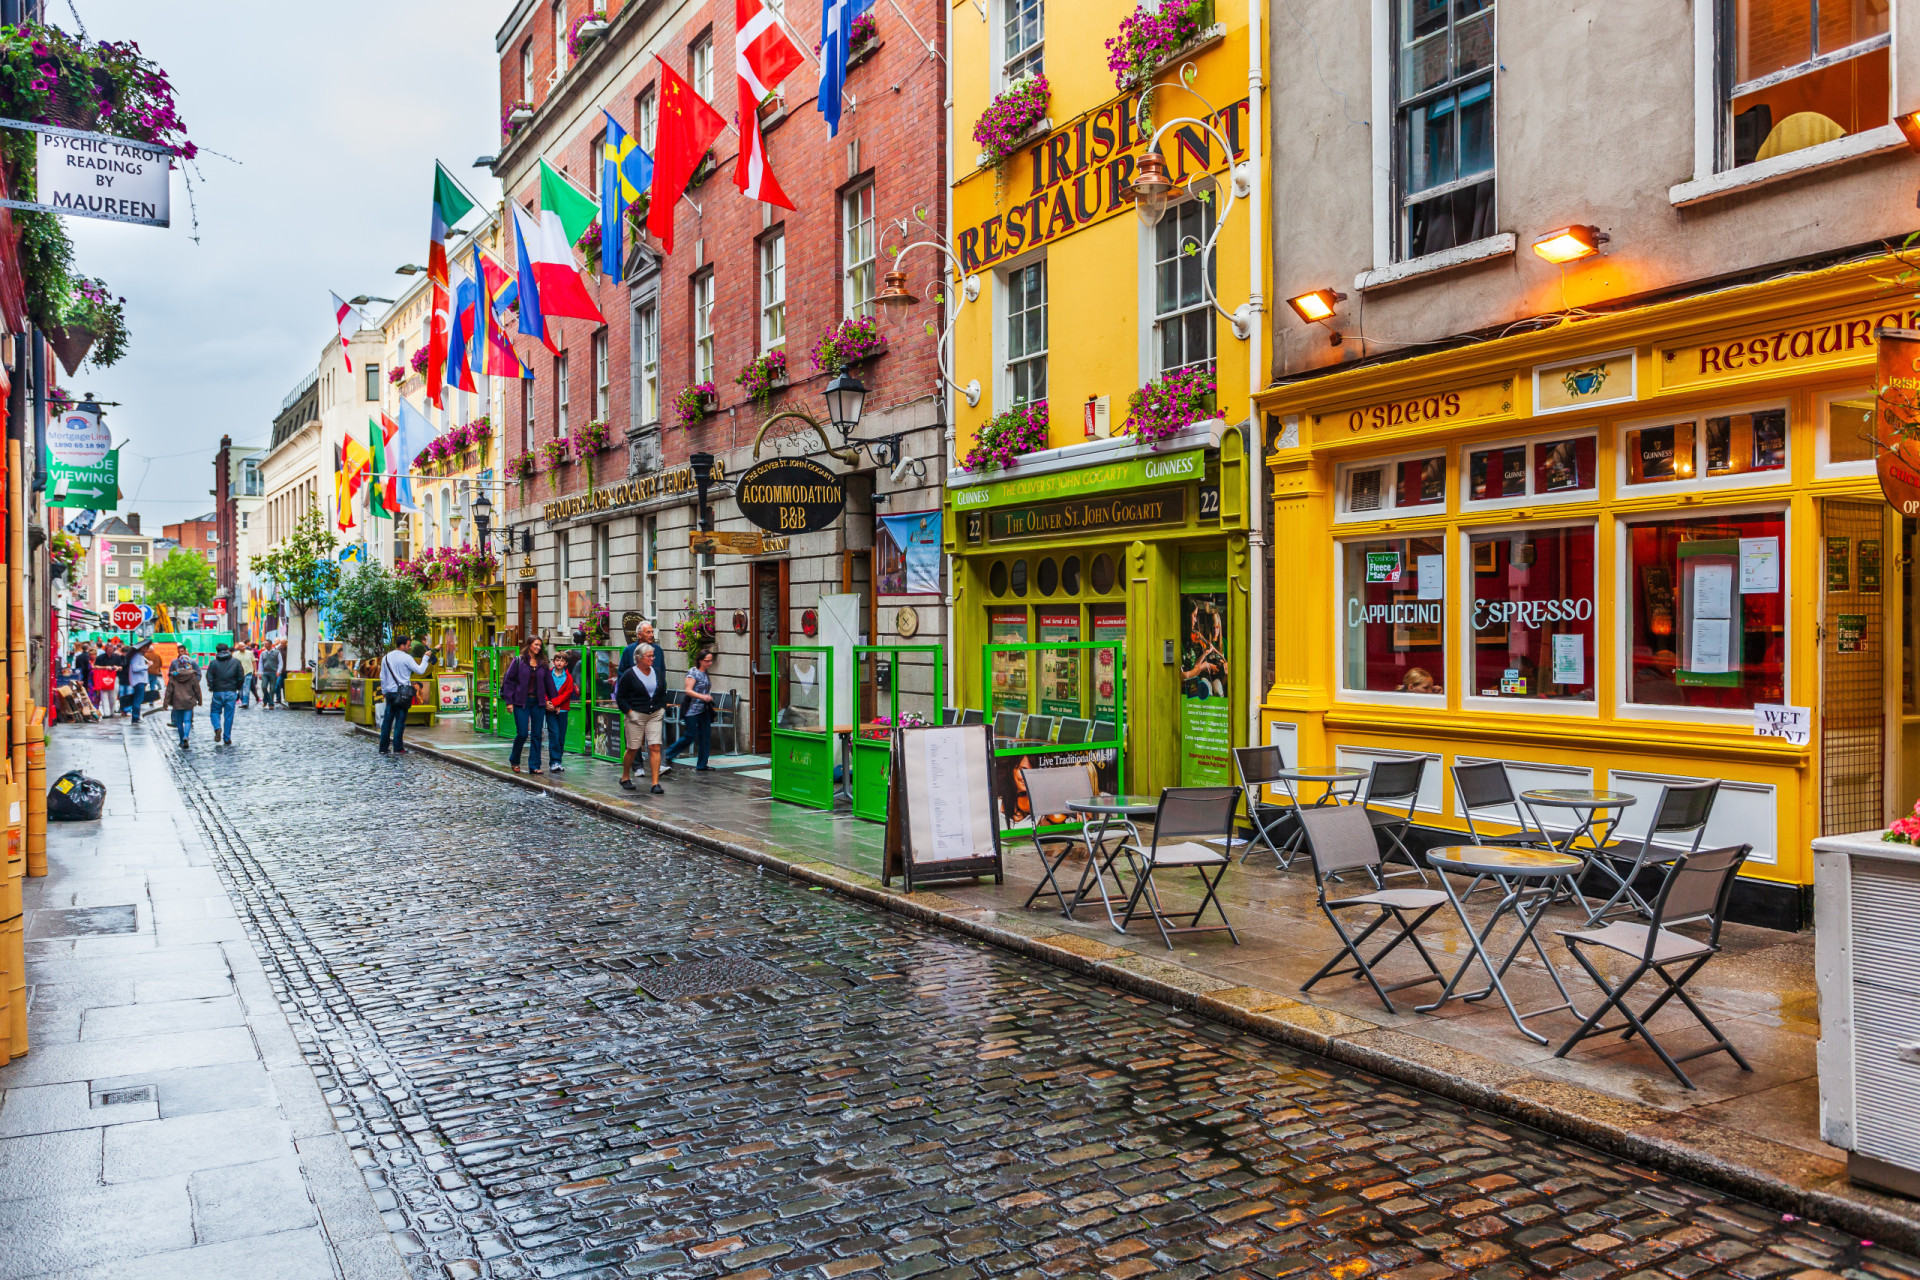 <p>James Joyce's 'Ulysses' is a love letter to Dublin, with its narrative tracing the steps of Leopold Bloom through the city's streets. Literary enthusiasts can follow in Bloom's footsteps, visiting landmarks like Davy Byrne's pub.</p><p>You may also like:<a href="https://www.starsinsider.com/n/220480?utm_source=msn.com&utm_medium=display&utm_campaign=referral_description&utm_content=639745en-us"> Celebrities who have sued their own parents</a></p>